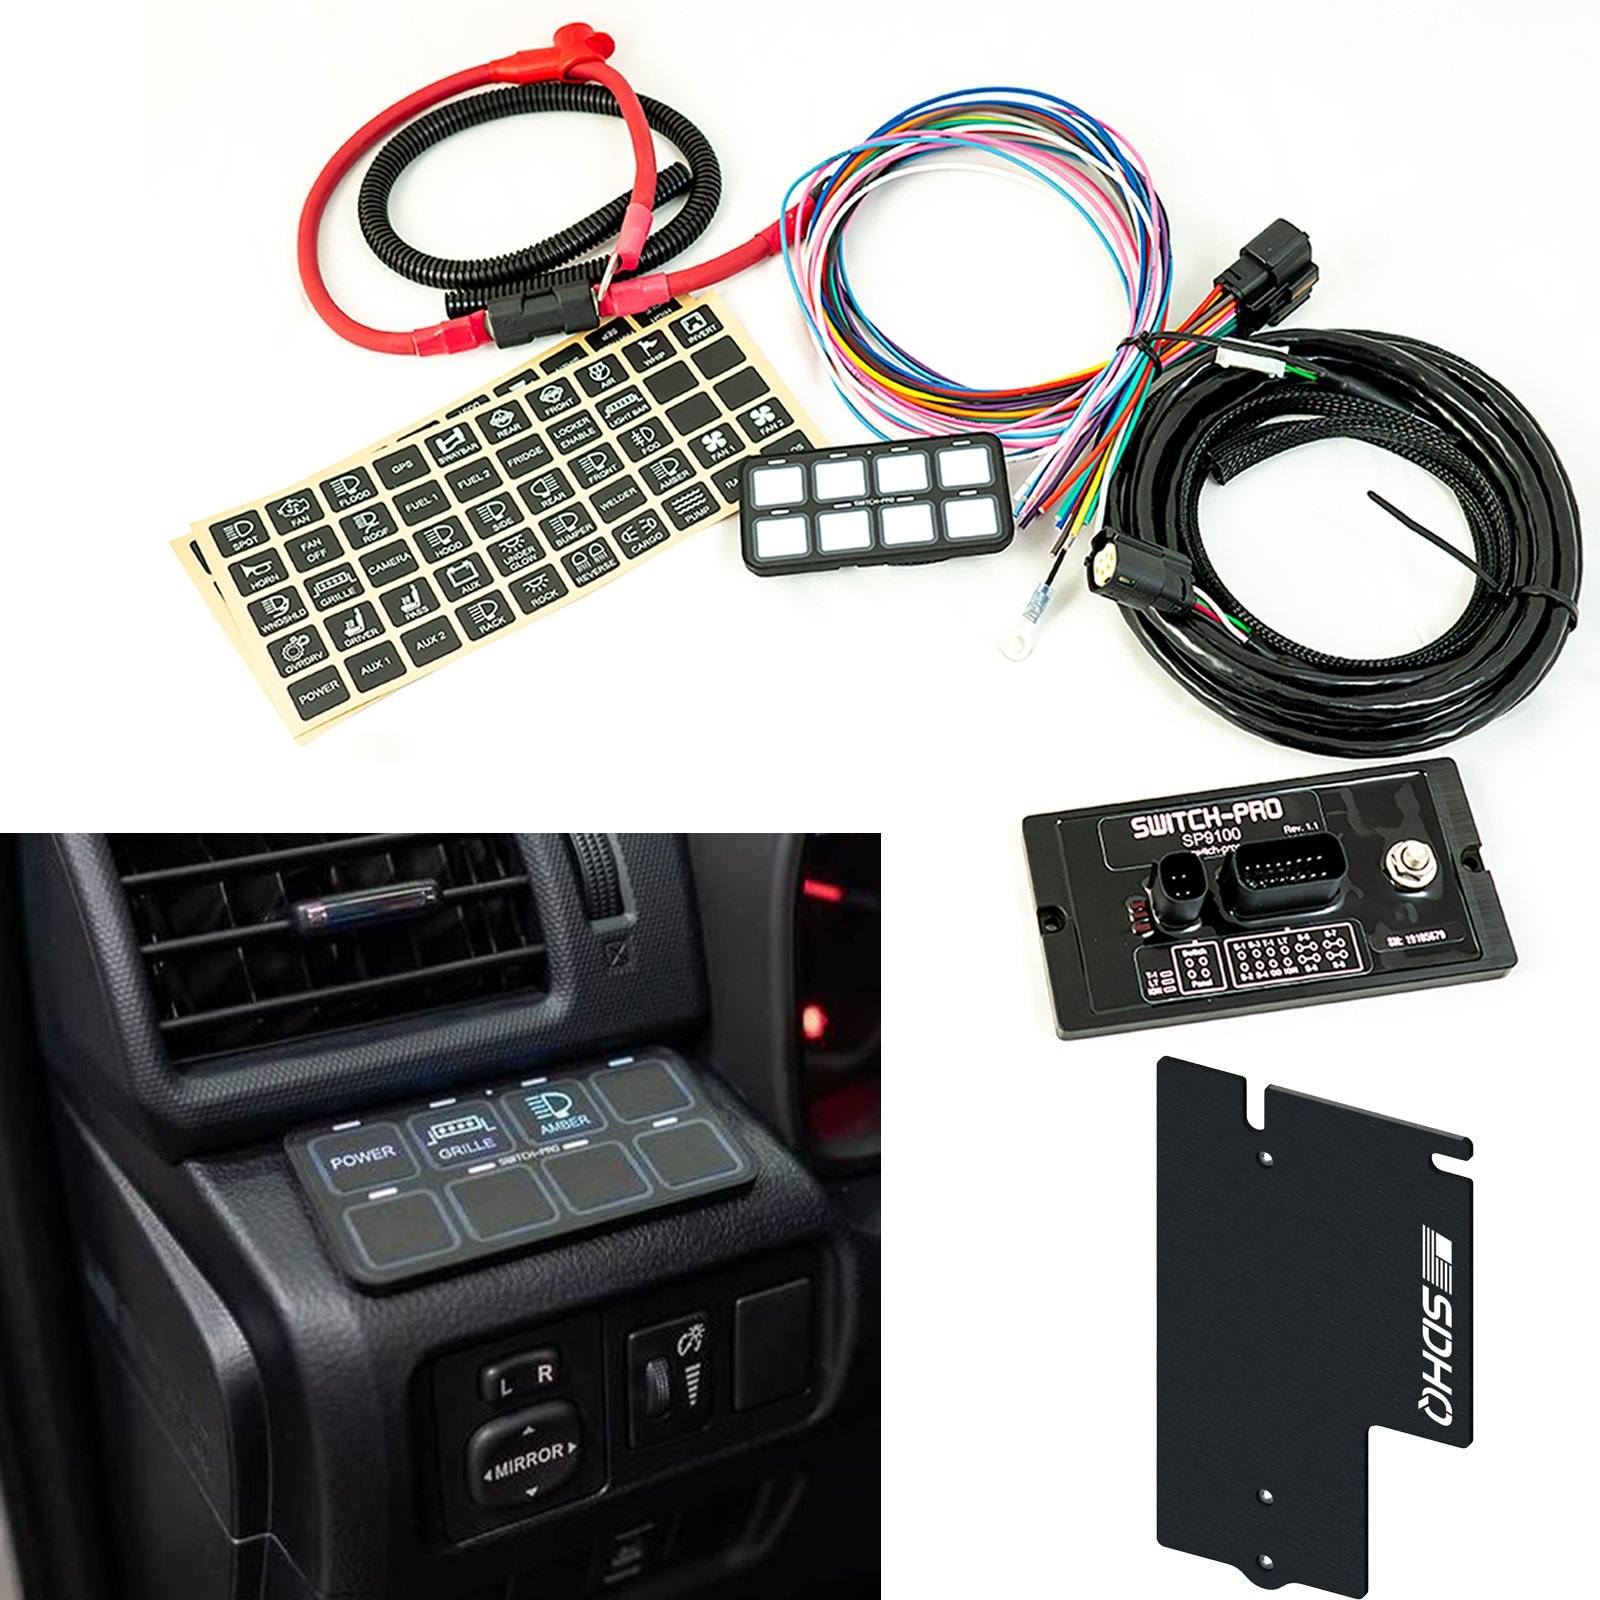 '10-23 Toyota 4Runner SDHQ Built Complete Switch Pros Mounting Kit Lighting SDHQ Off Road